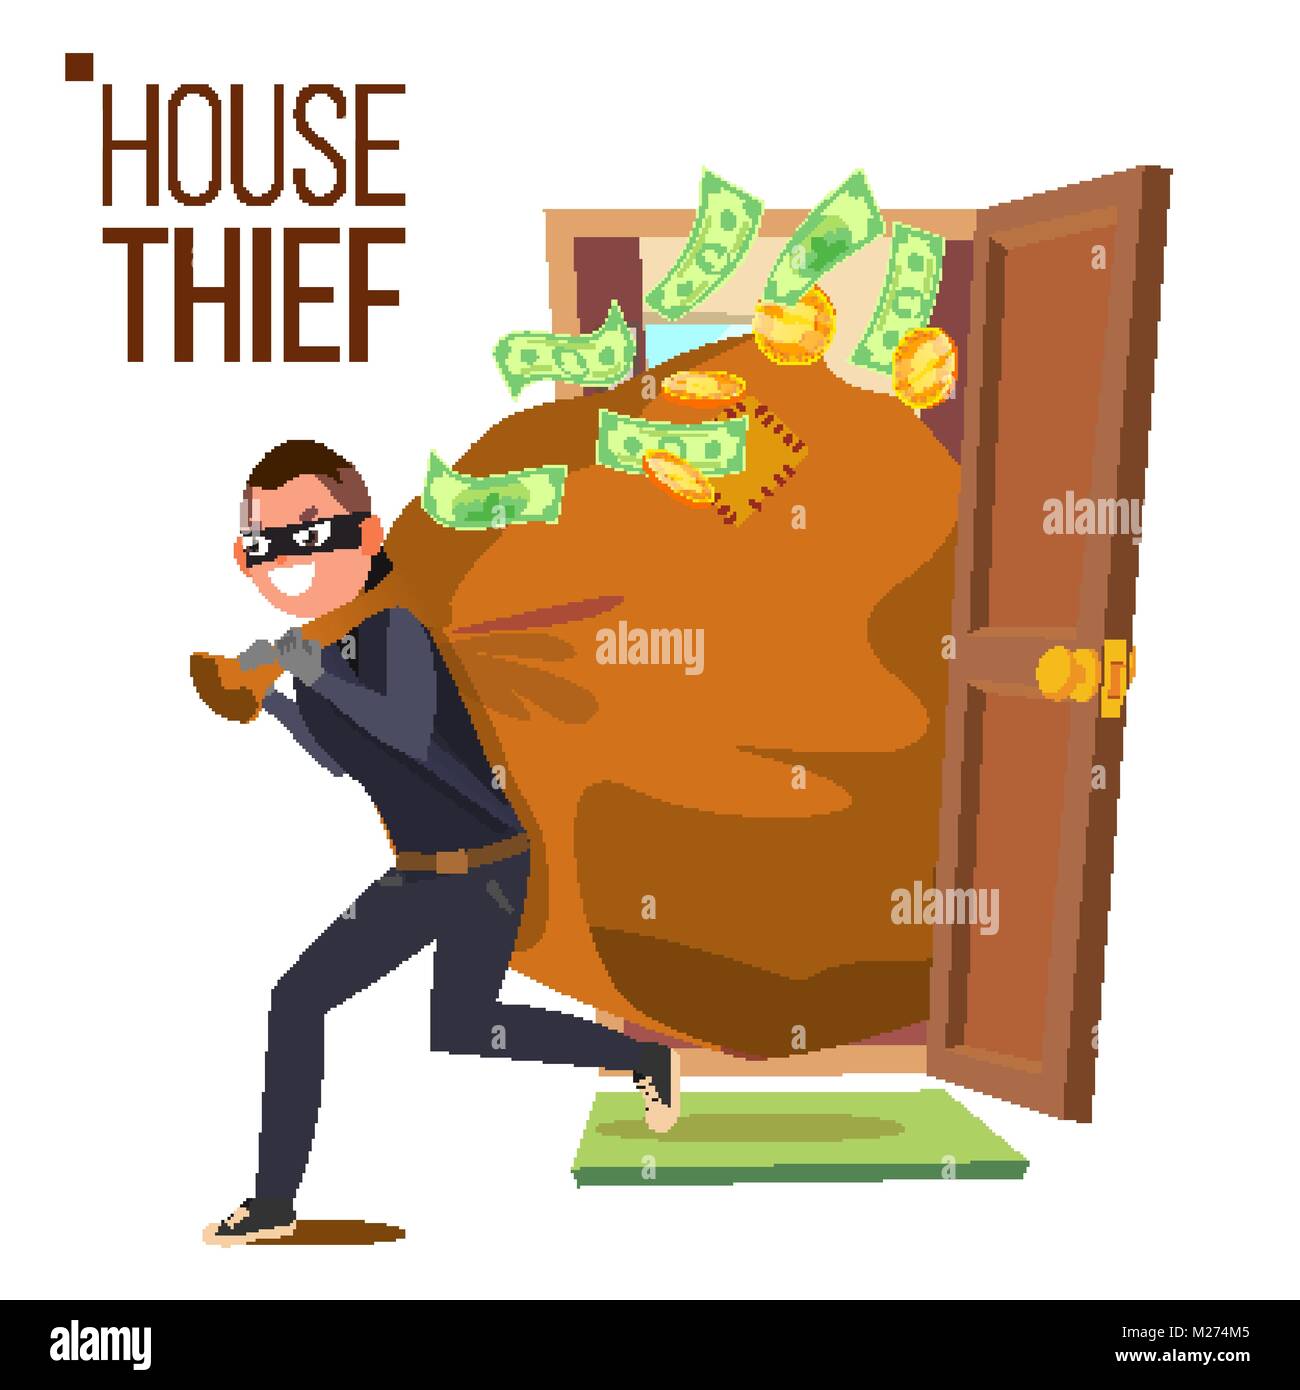 Thief And Door Vector. Bandit With Bag. Breaking Into House Through Door. Insurance Concept. Burglar, Robber In Mask, Thief, Robbery, Purse. Isolated Flat Cartoon Illustration Stock Vector